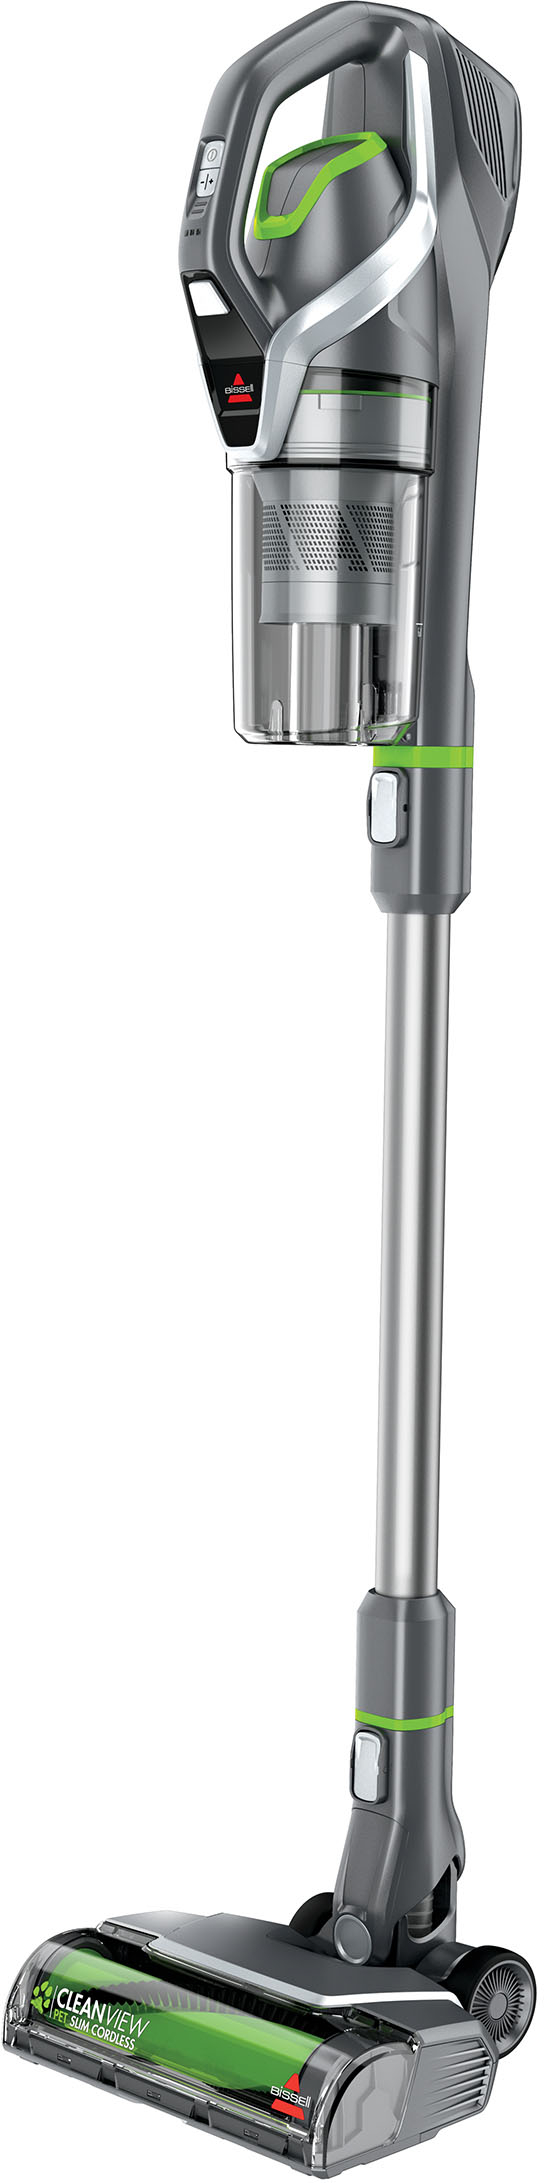 Left View: BISSELL - CleanView Pet Slim Cordless Stick Vacuum - Silver/Titanium with ChaCha Live Accents